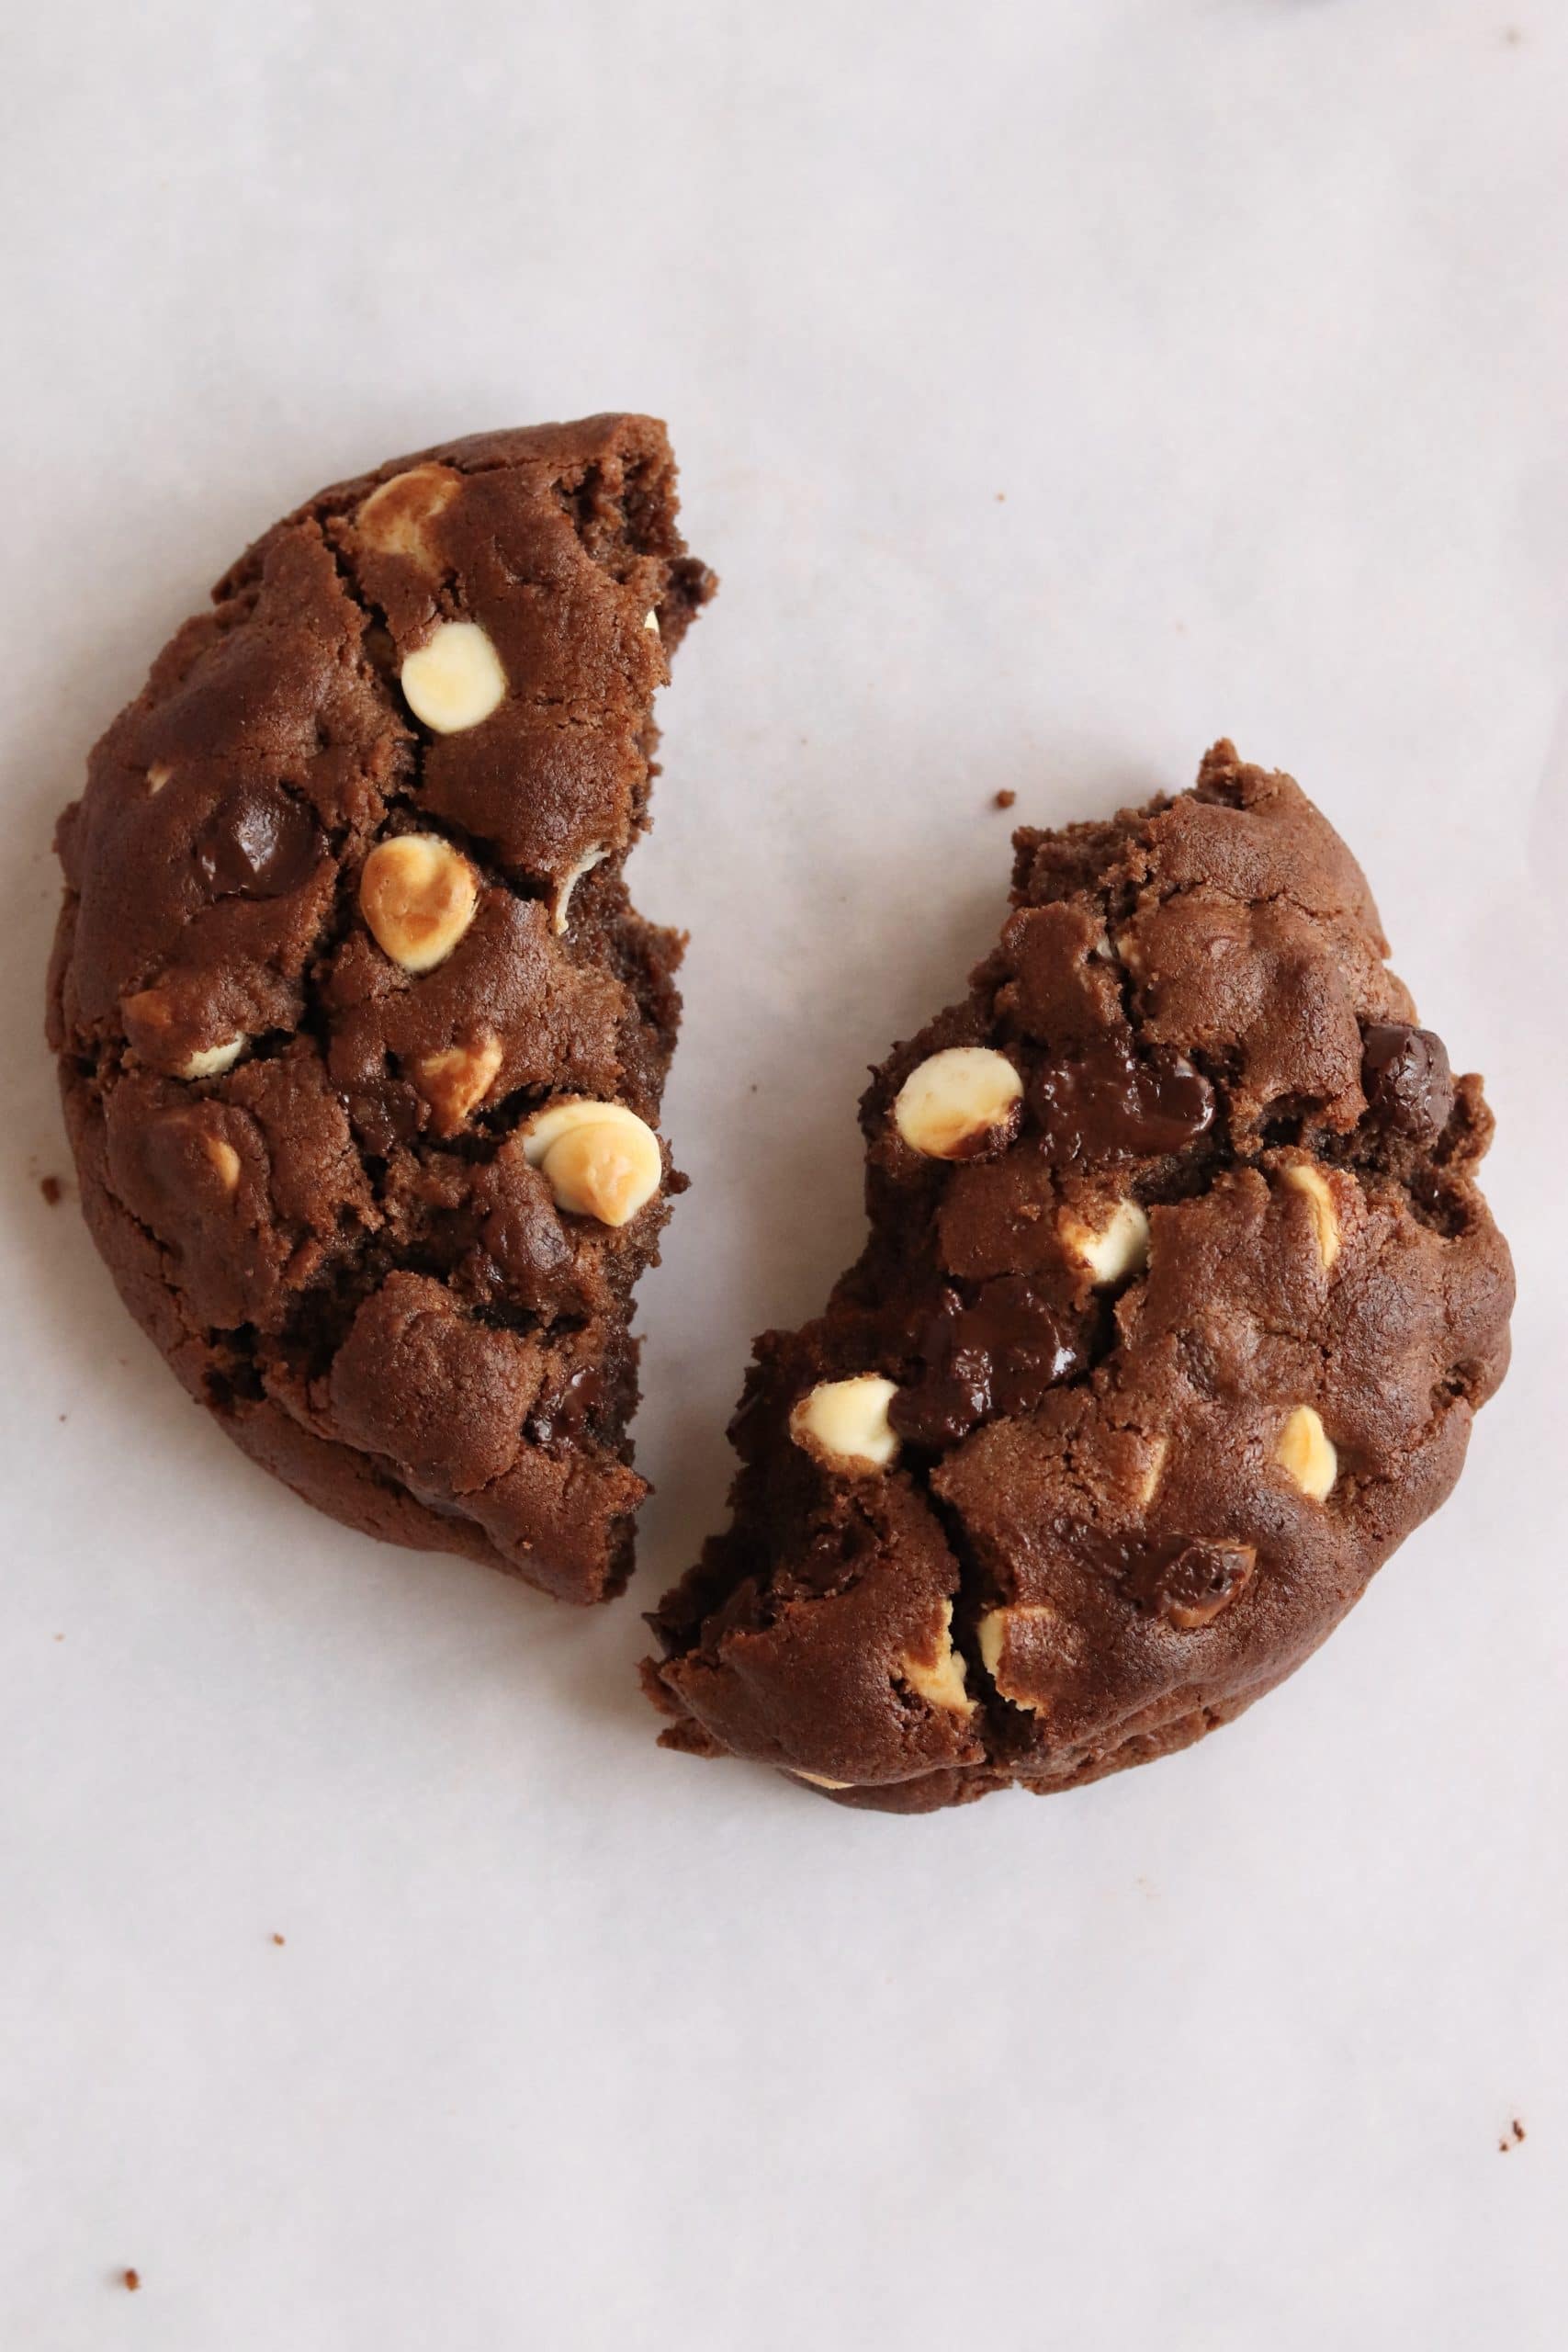 Thick triple chocolate cookie torn in half with melted chocolate